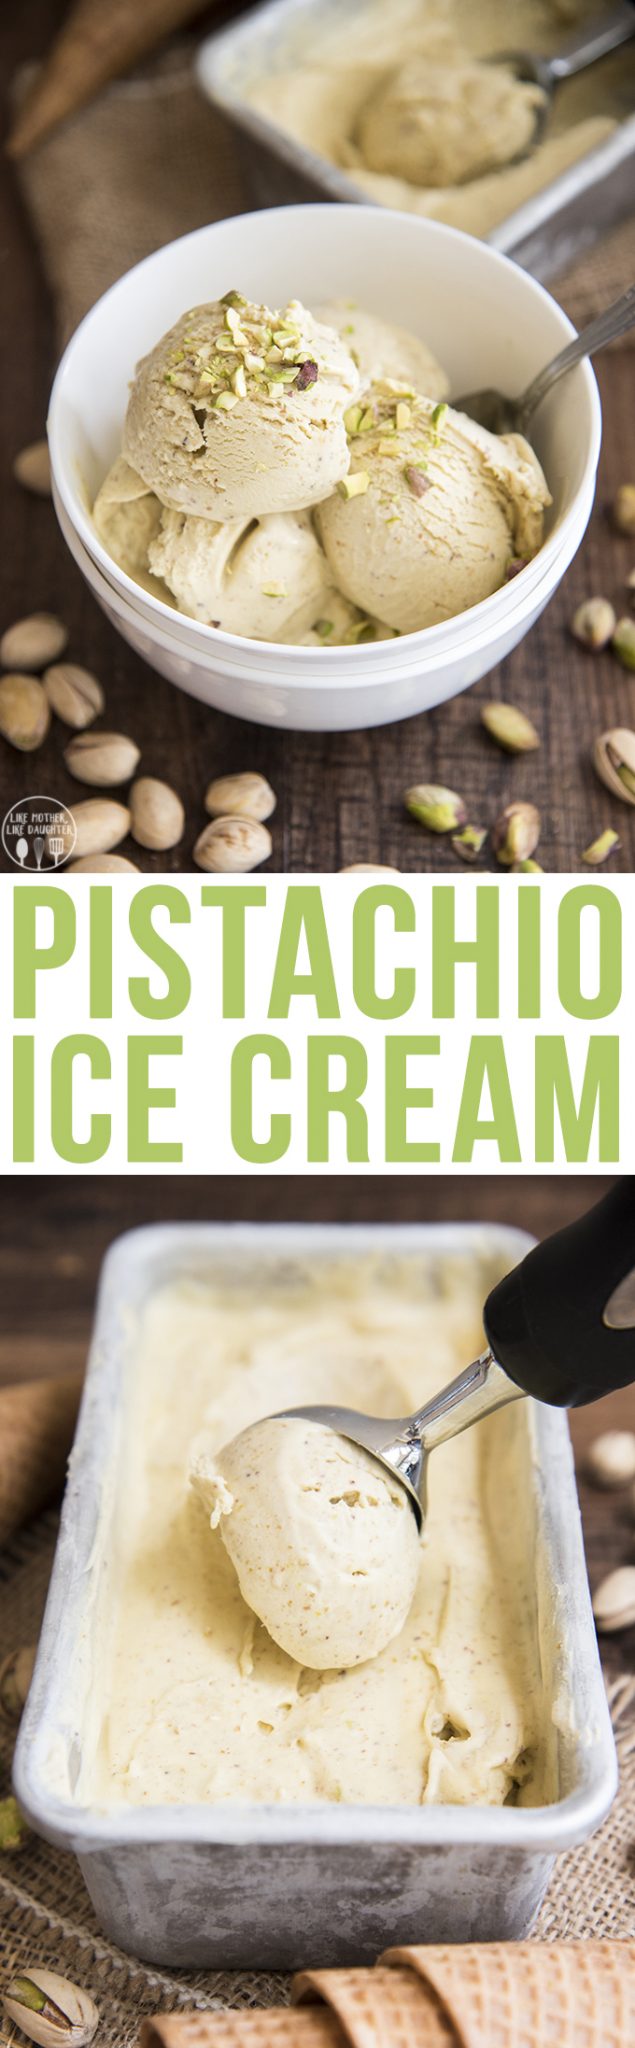 Pistachio Ice Cream - This is the best pistachio ice cream recipe ever! It's thick, creamy, smooth, flavorful and so delicious!